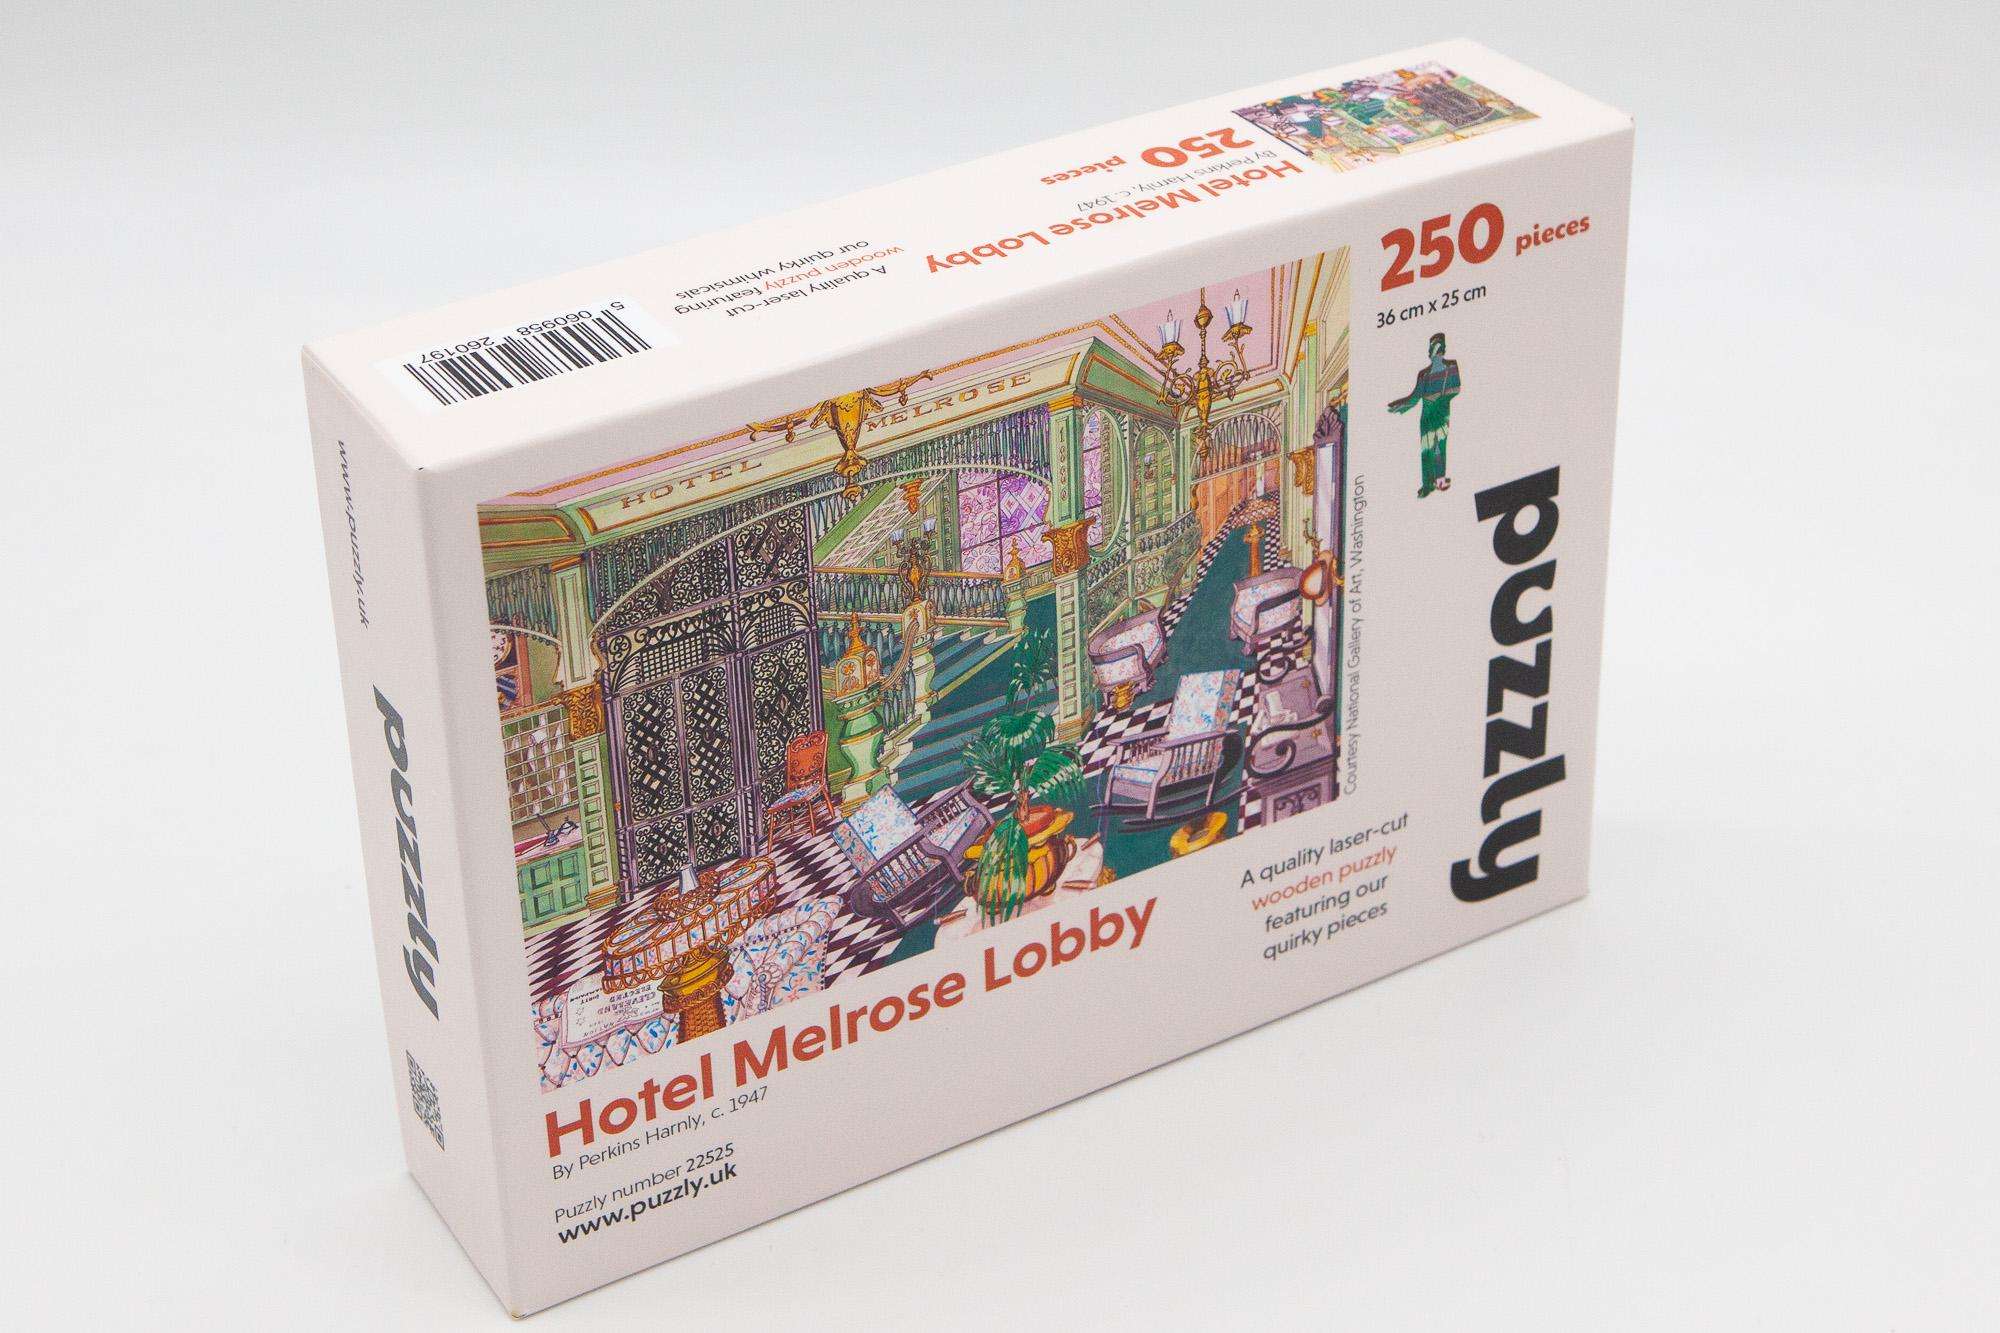 Hotel Melrose Lobby Wooden Puzzle